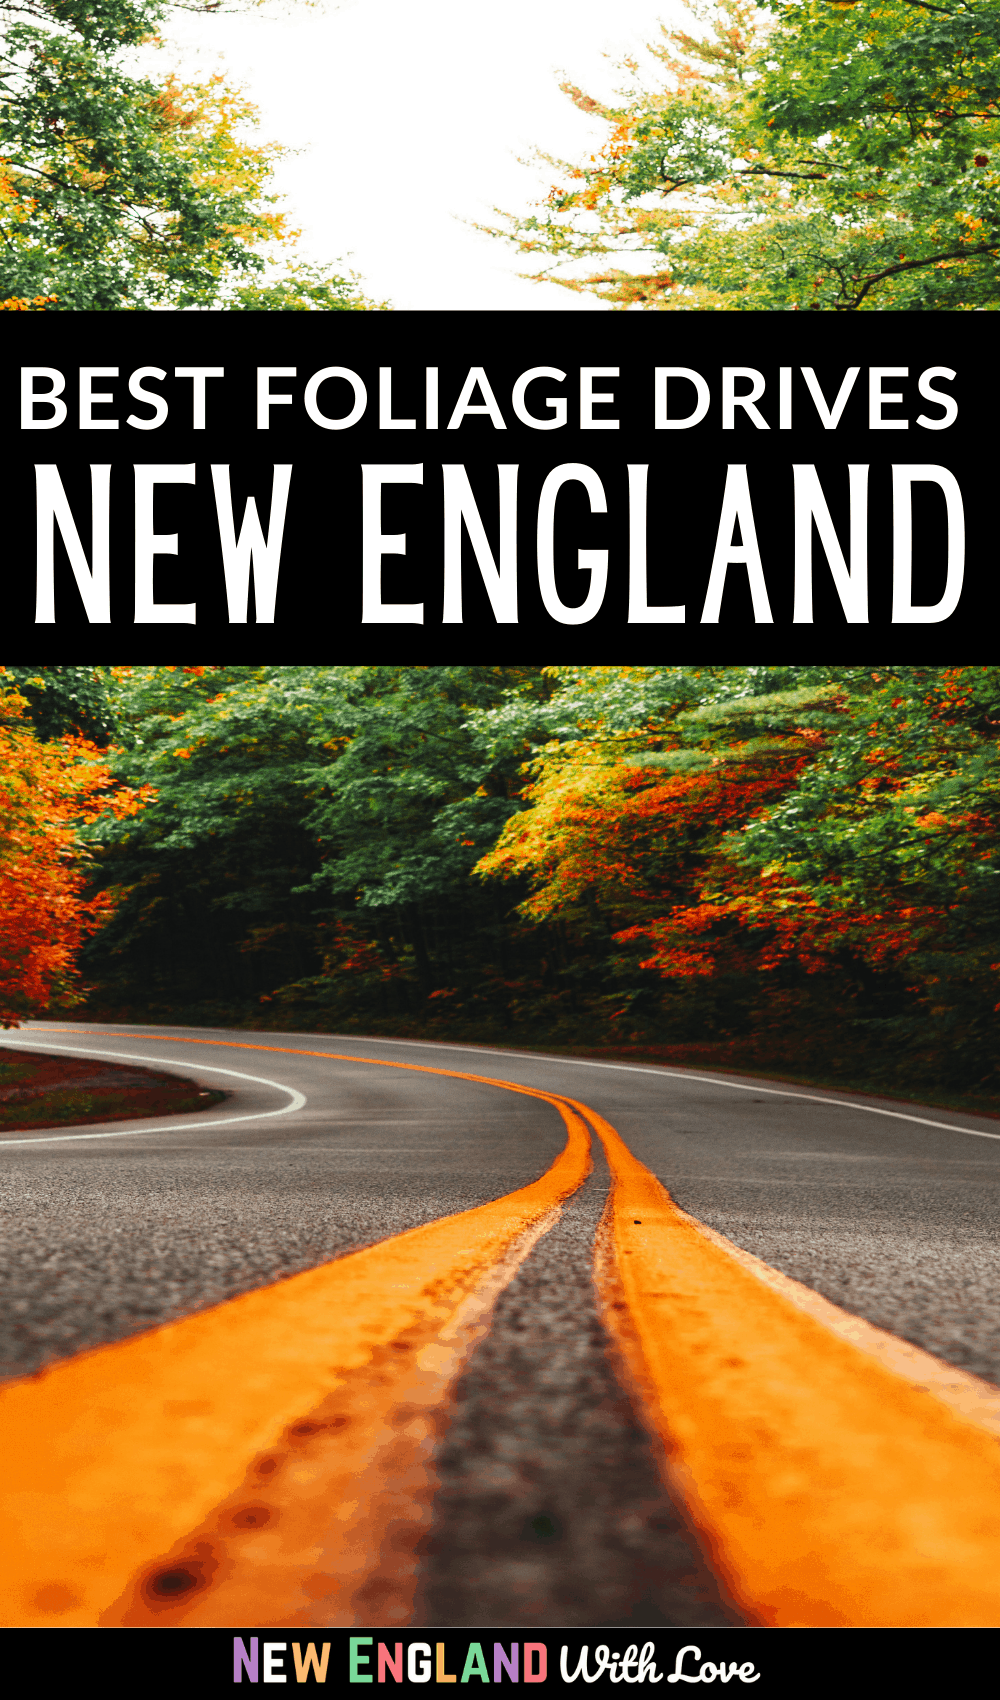 Pinterest graphic reading "BEST FOLIAGE DRIVES NEW ENGLAND"